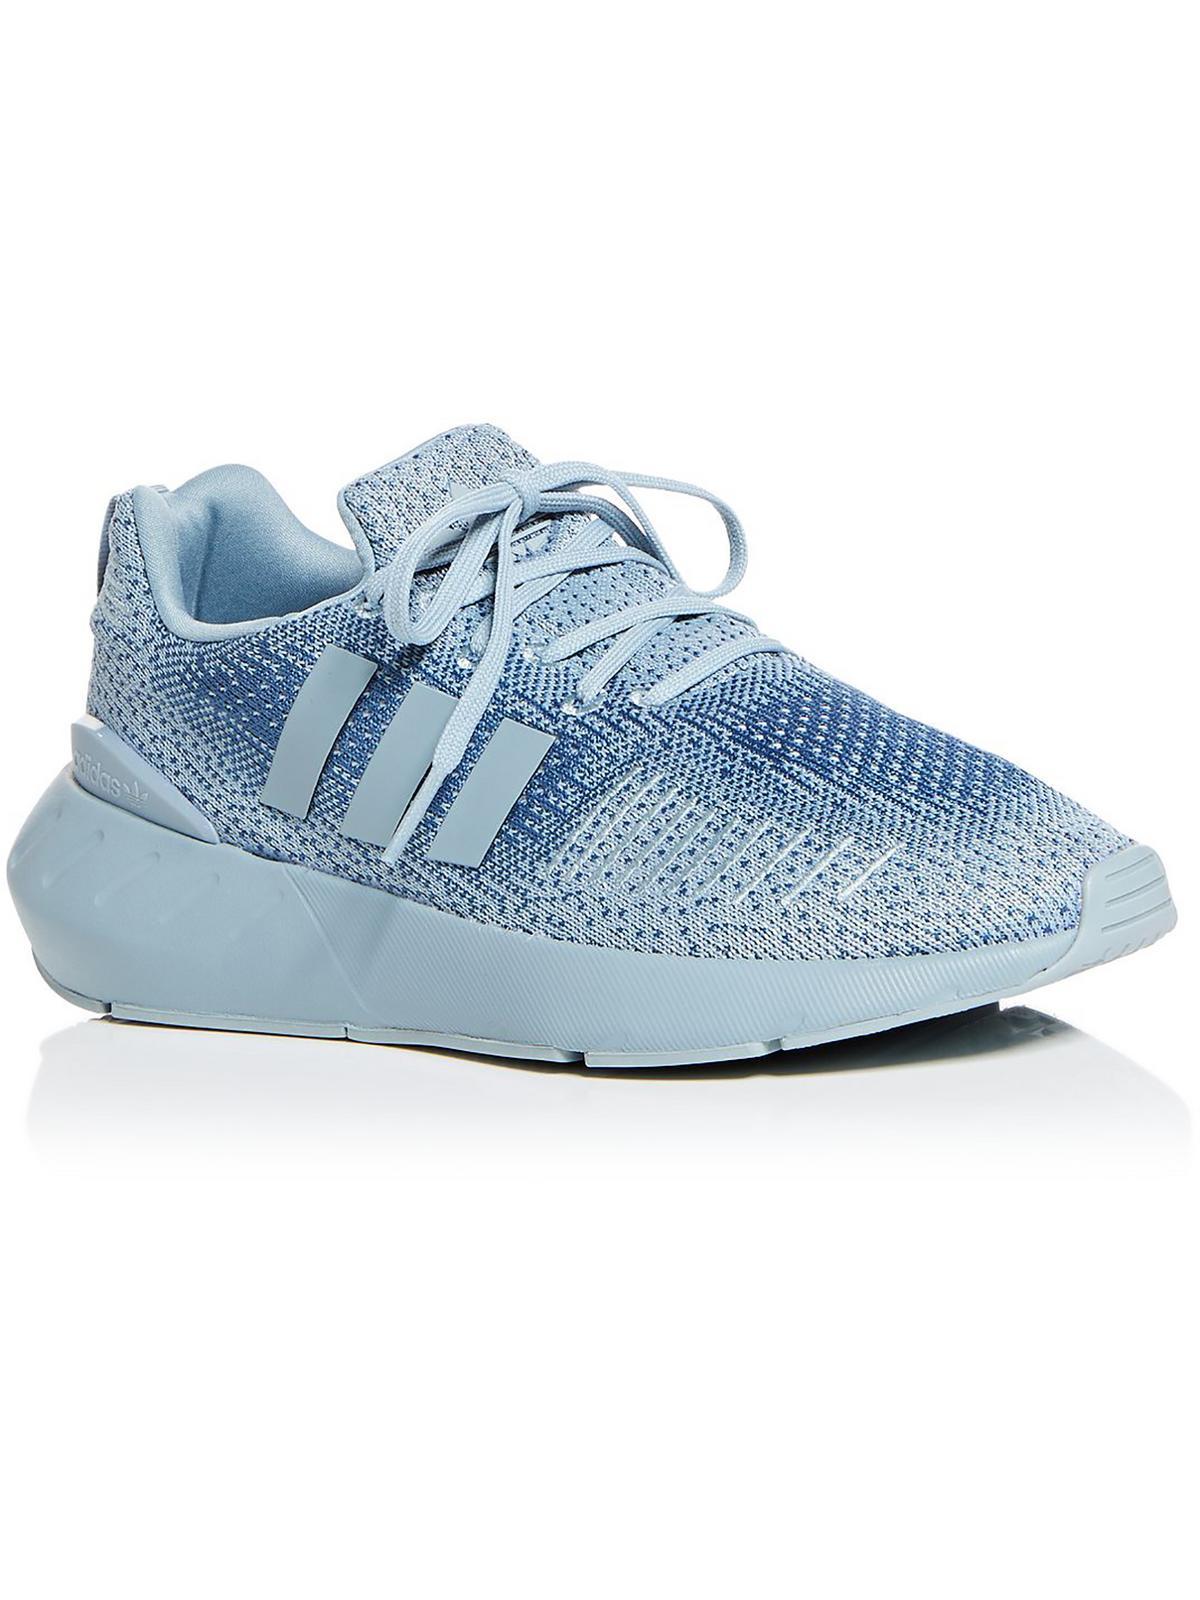 adidas Originals Swift Run 22 Lifestyle Lightweight Casual And Fashion  Sneakers in Blue | Lyst